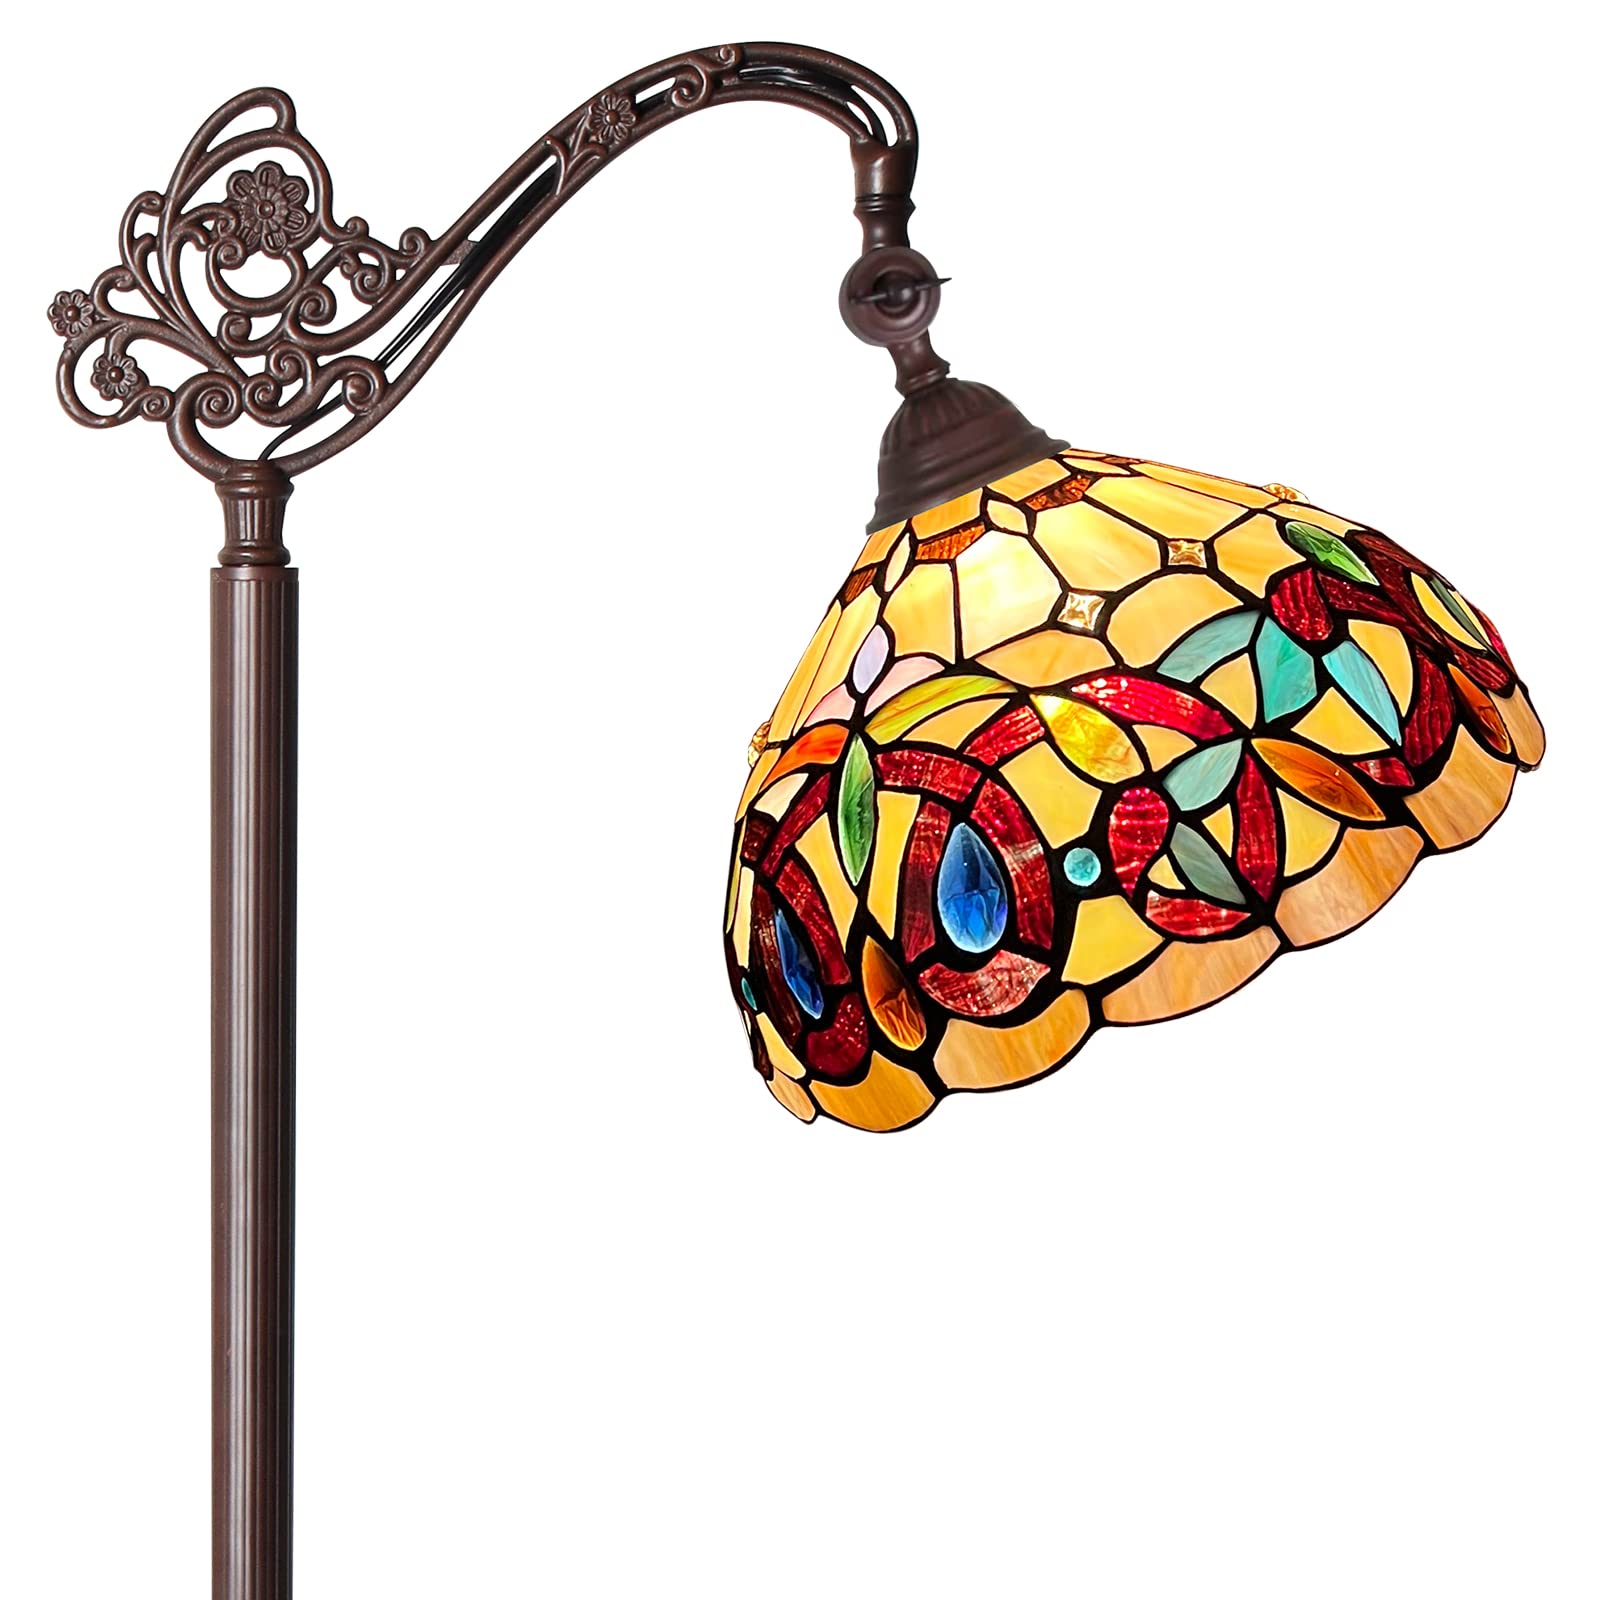 Capulina Tiffany Floor Lamp H62 Tall Inlaid Crystal Victorian Style Stained Glass Soft Light Arched Gooseneck Adjustable Angle Reading Lamp for Living Room Bedroom